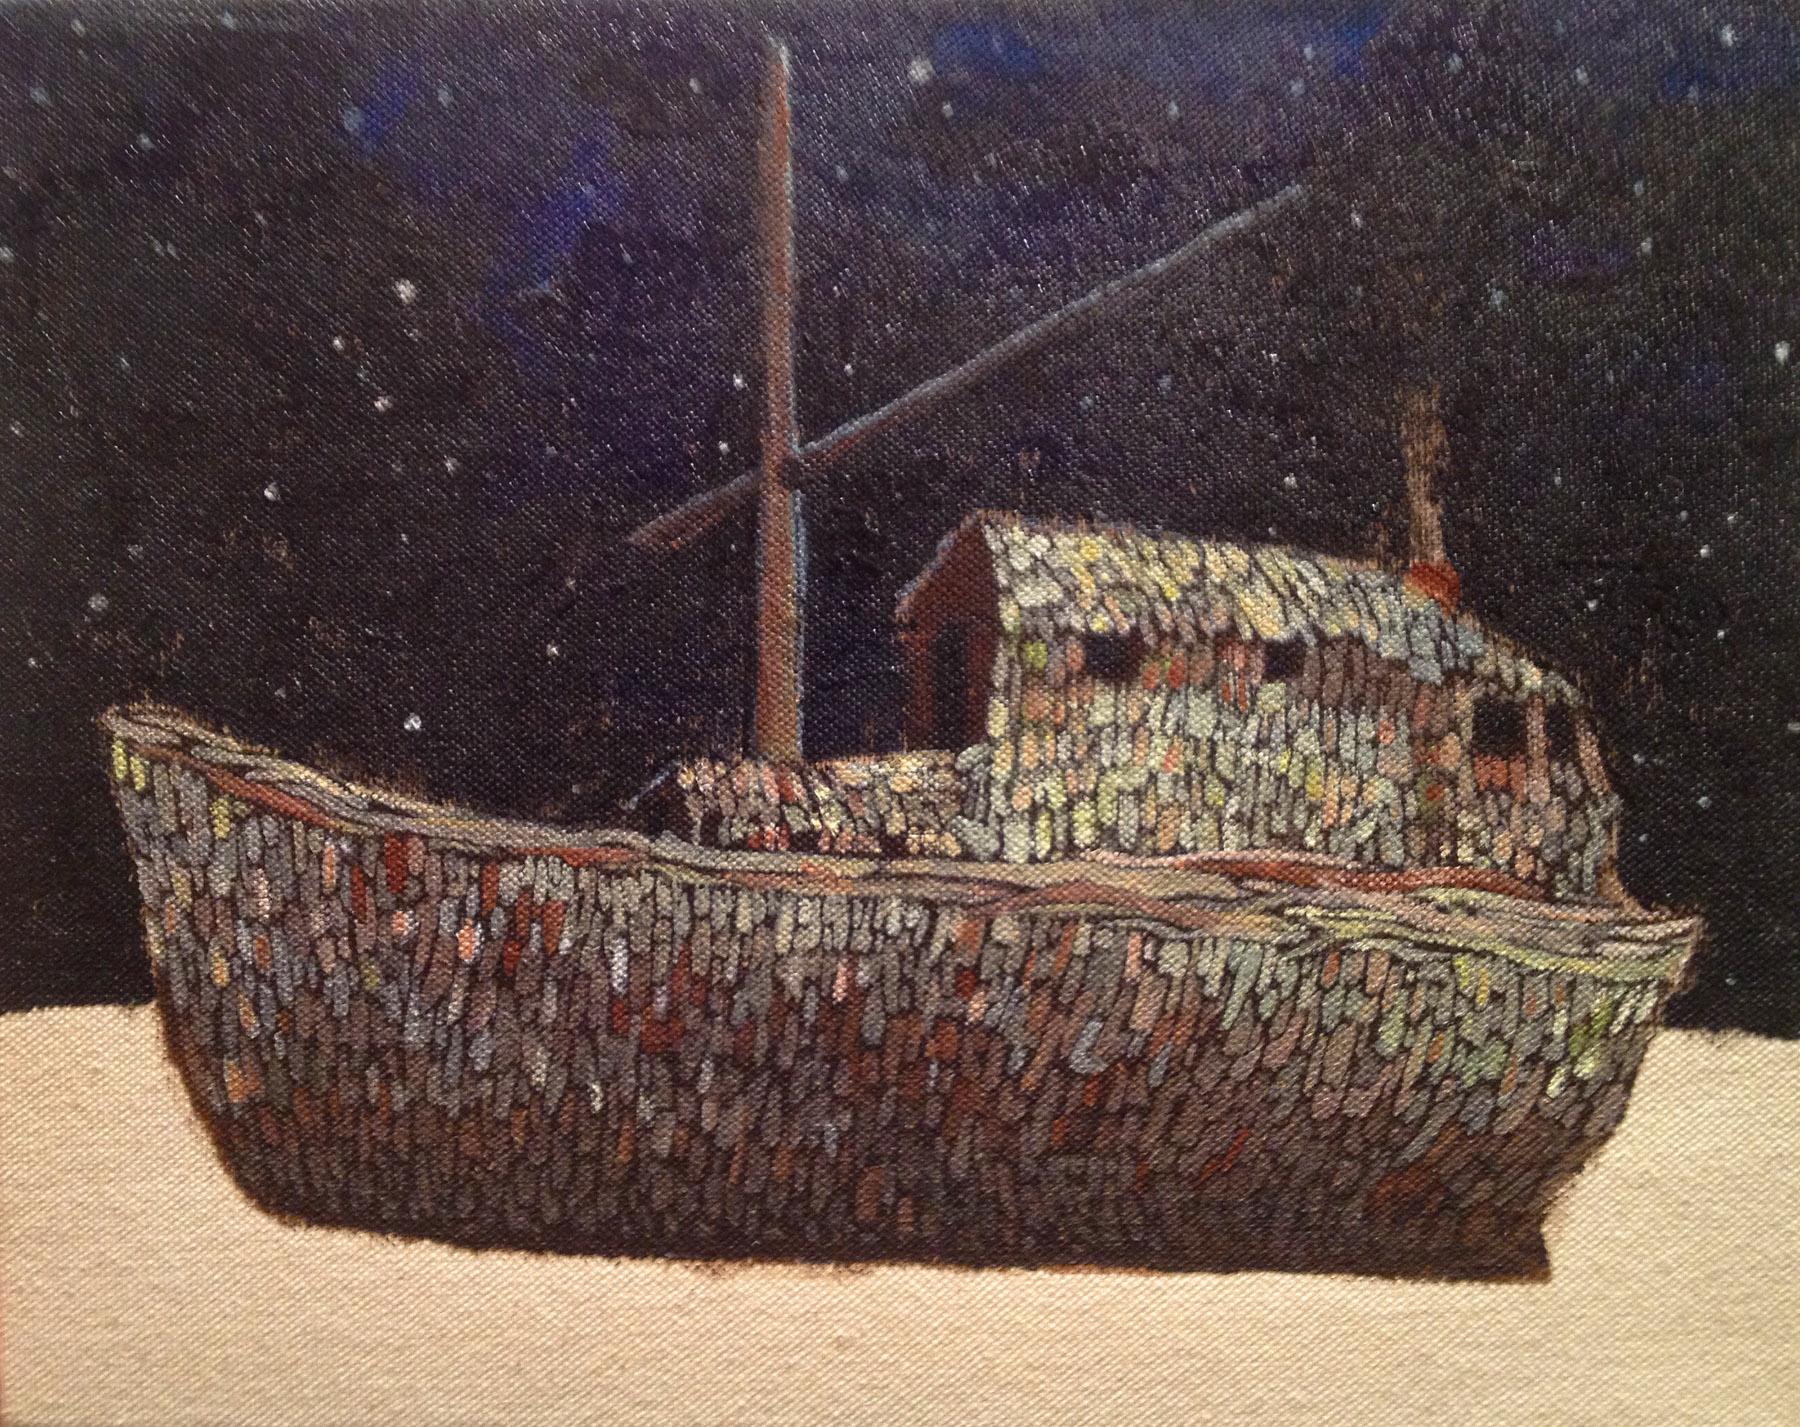    Ship of Glass    Acrylic on canvas  8" x 10"  2012  (sold)    